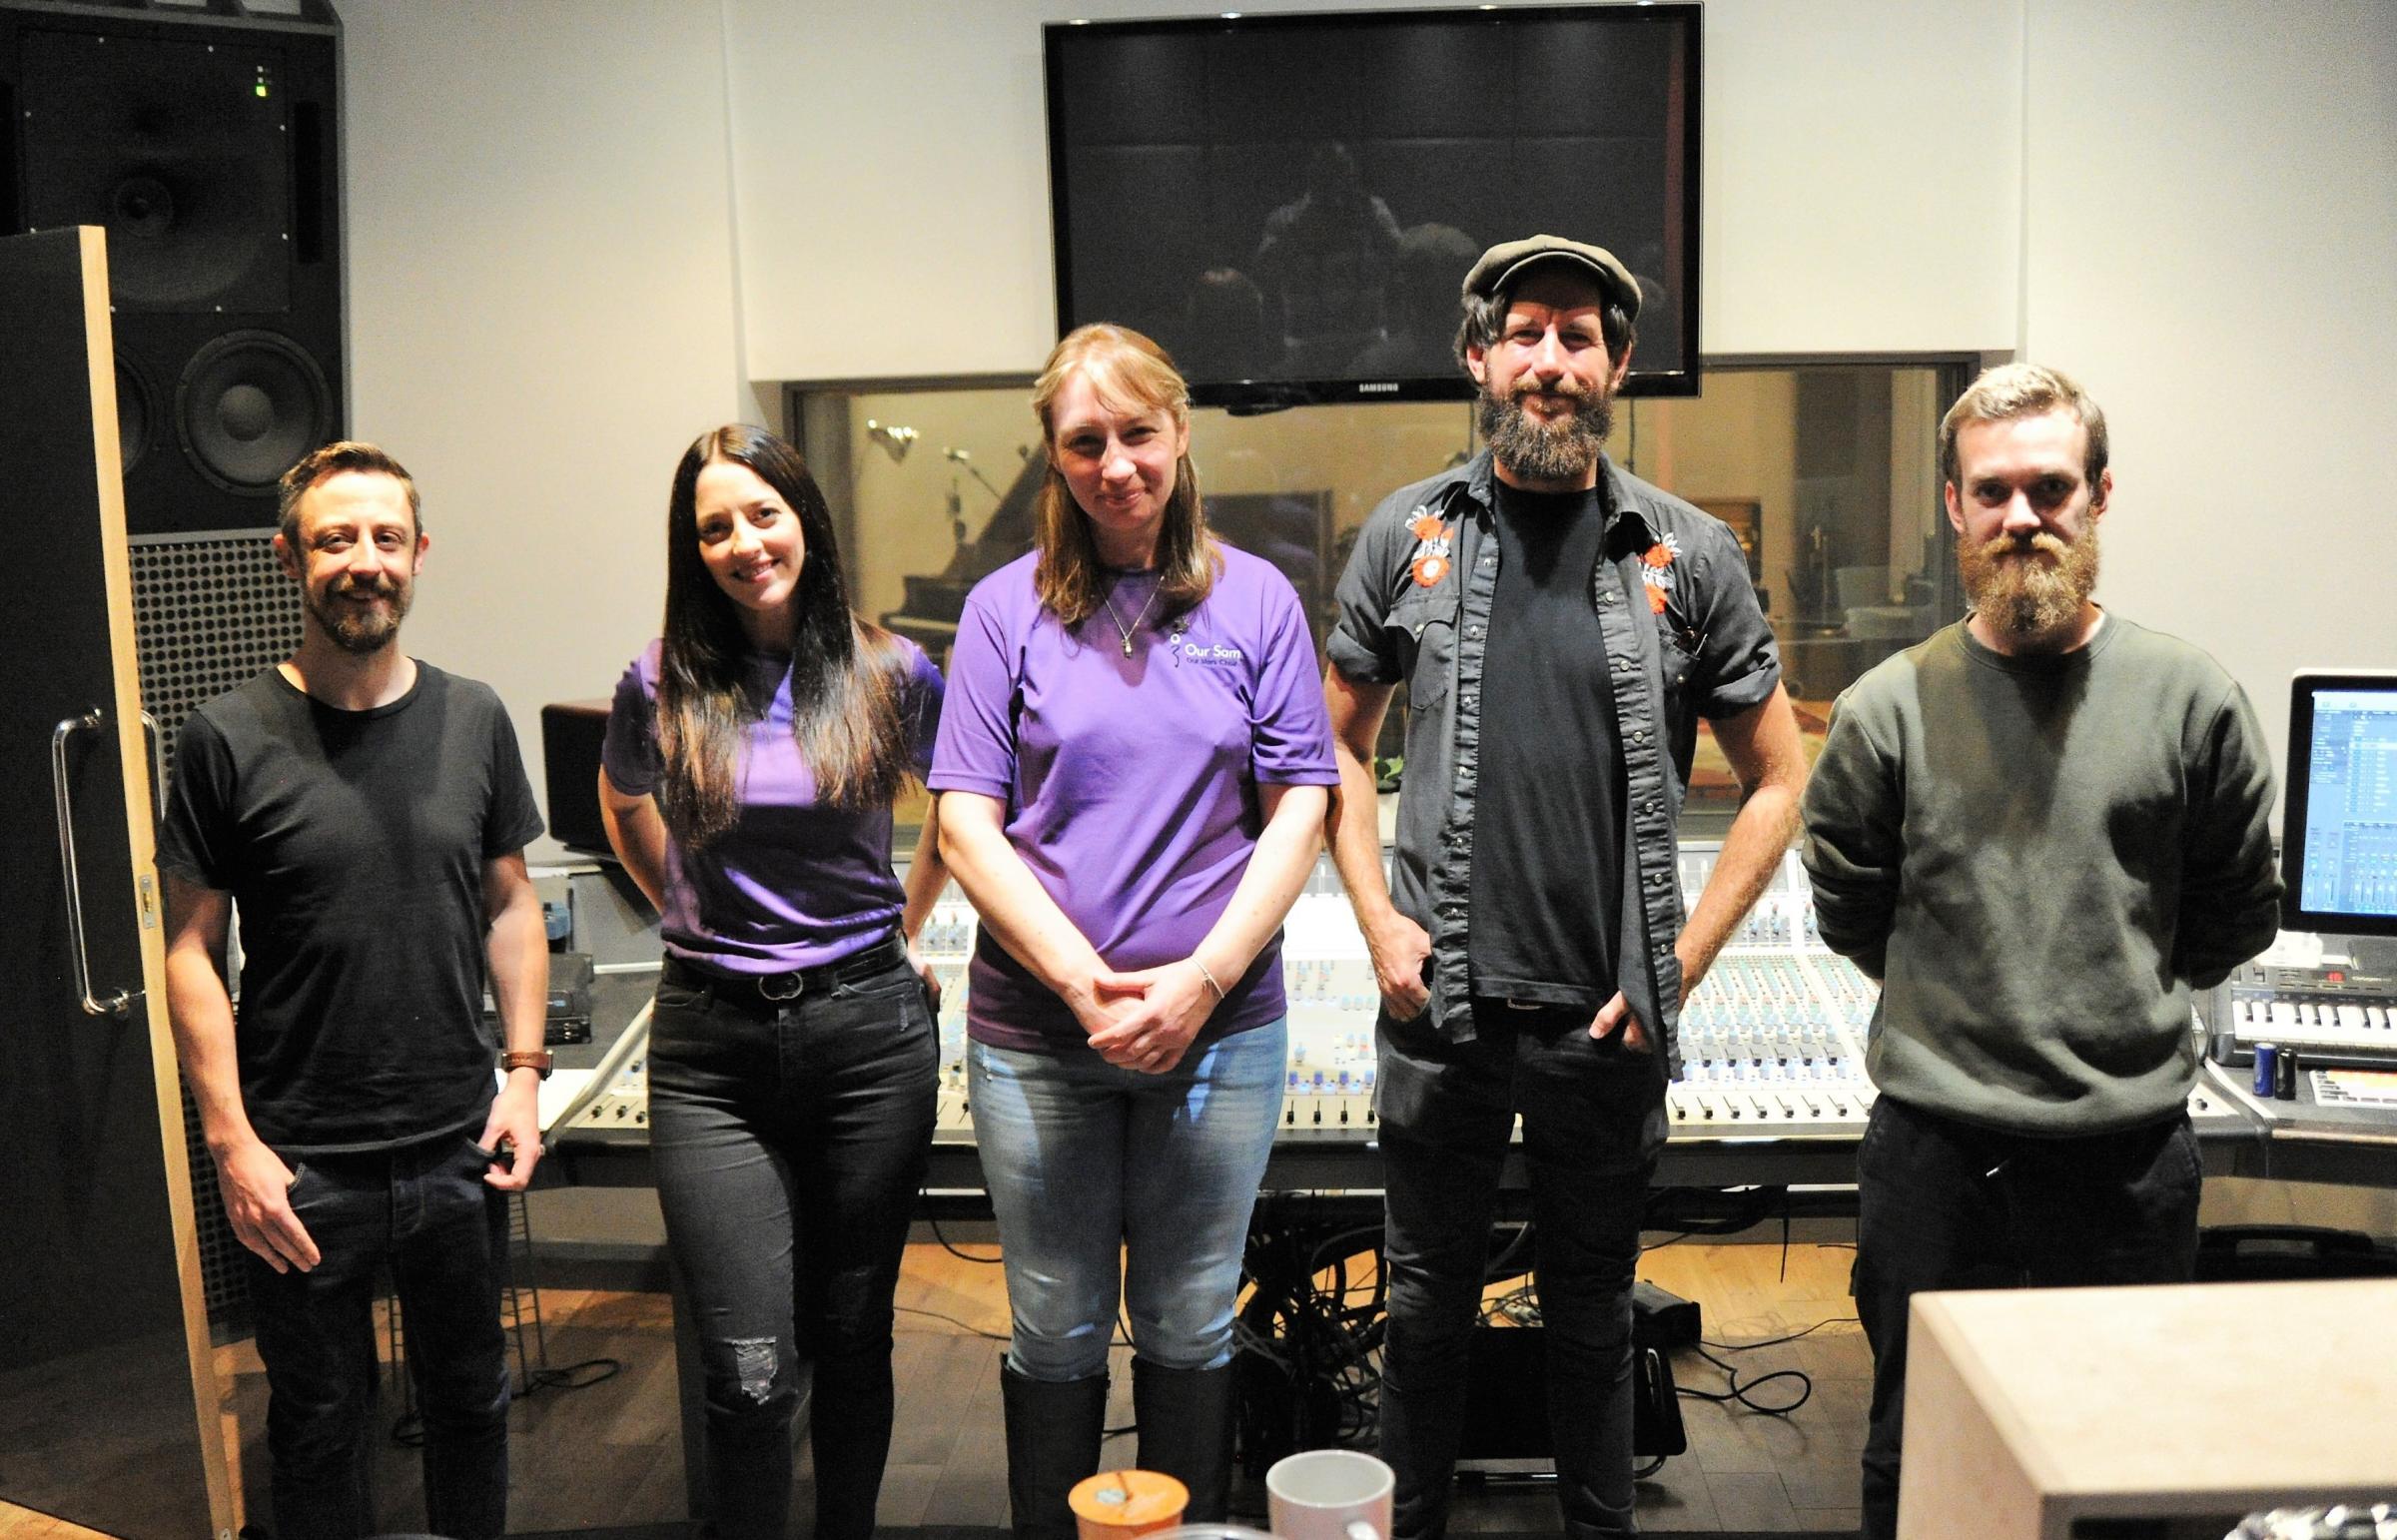 Production team, from left: Music producer Chris Hollis, vocalist Angela Inkson, Philippa Davies, video producer Paul Smith and studio guitarist Ben Thomas.